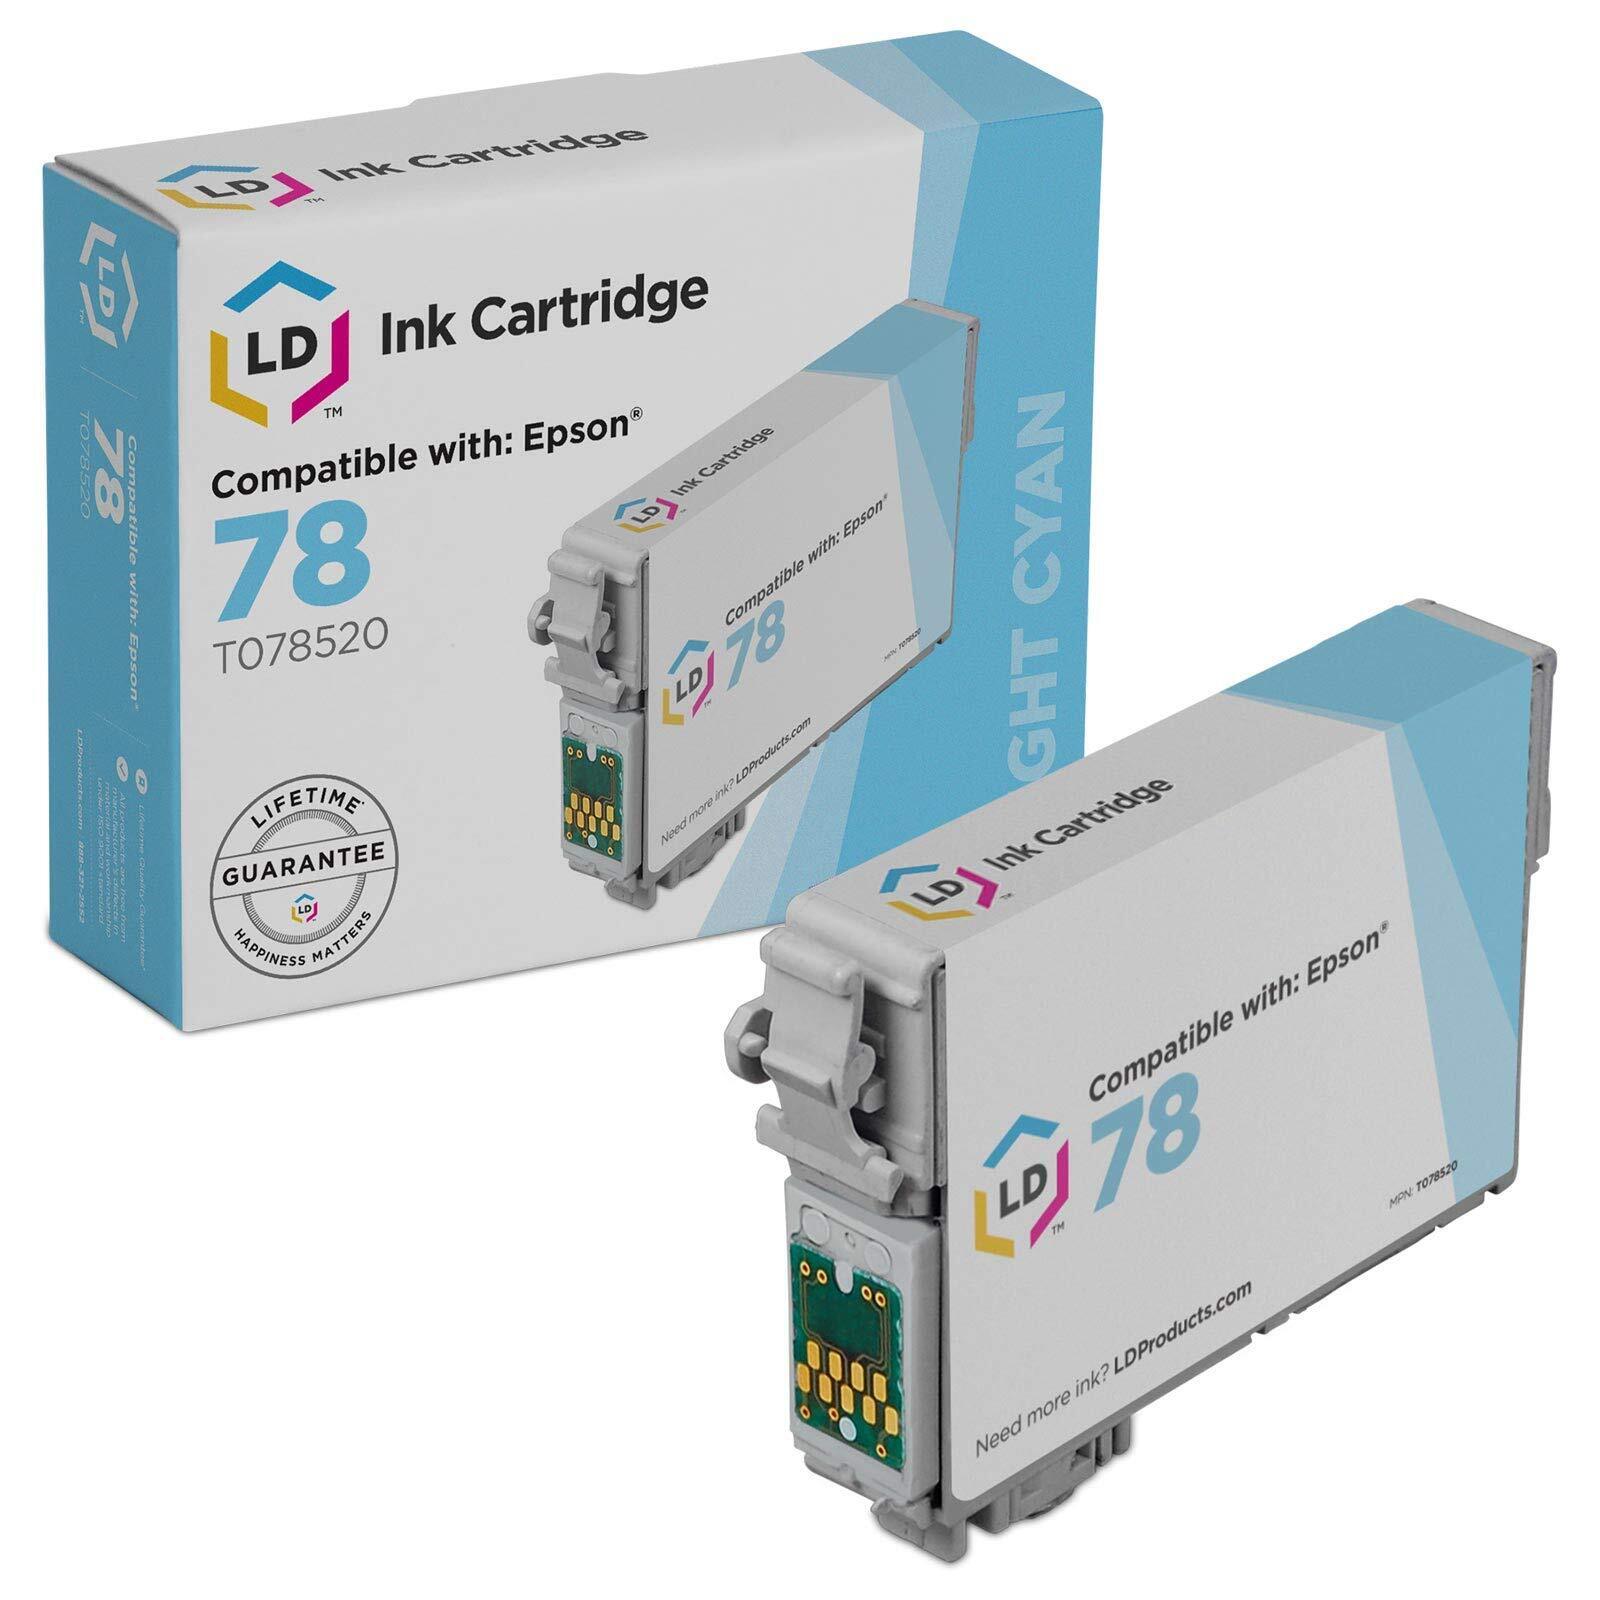 LD T078520 78 Light Cyan Ink Cartridge for Epson #78 R280 R380 RX580 RX595 RX680